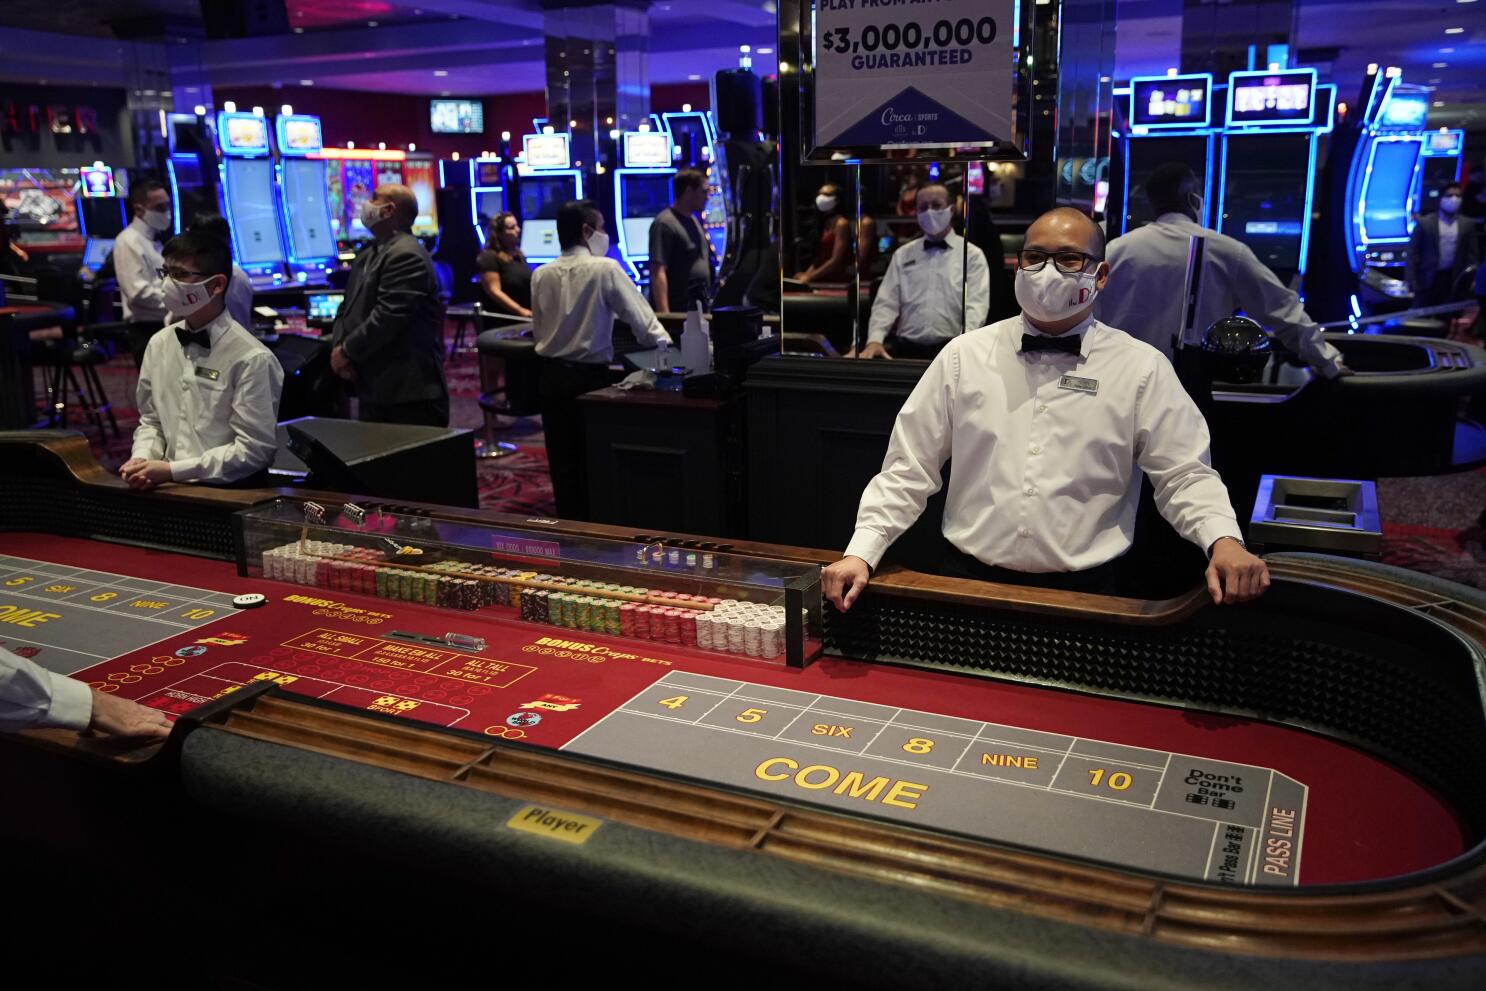 The Best Casinos For First Time Visitors To Las Vegas